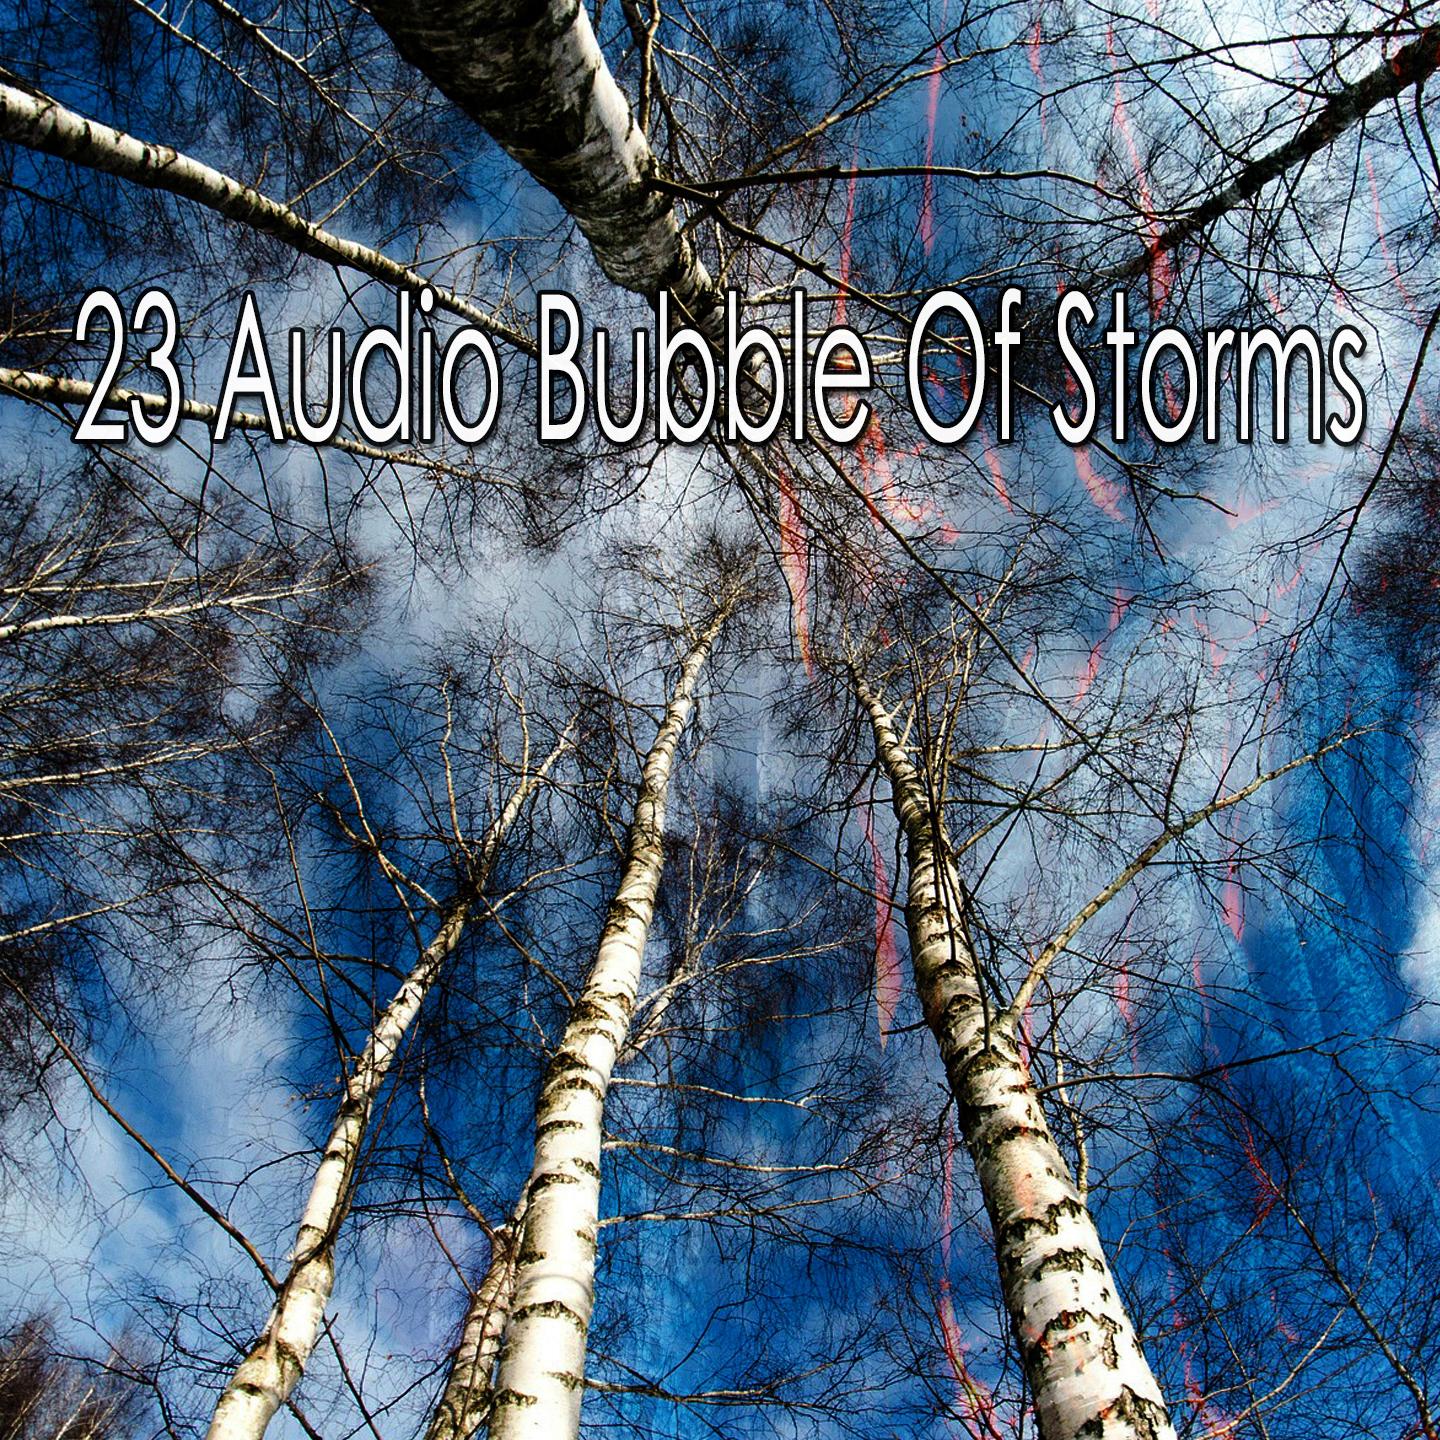 23 Audio Bubble of Storms